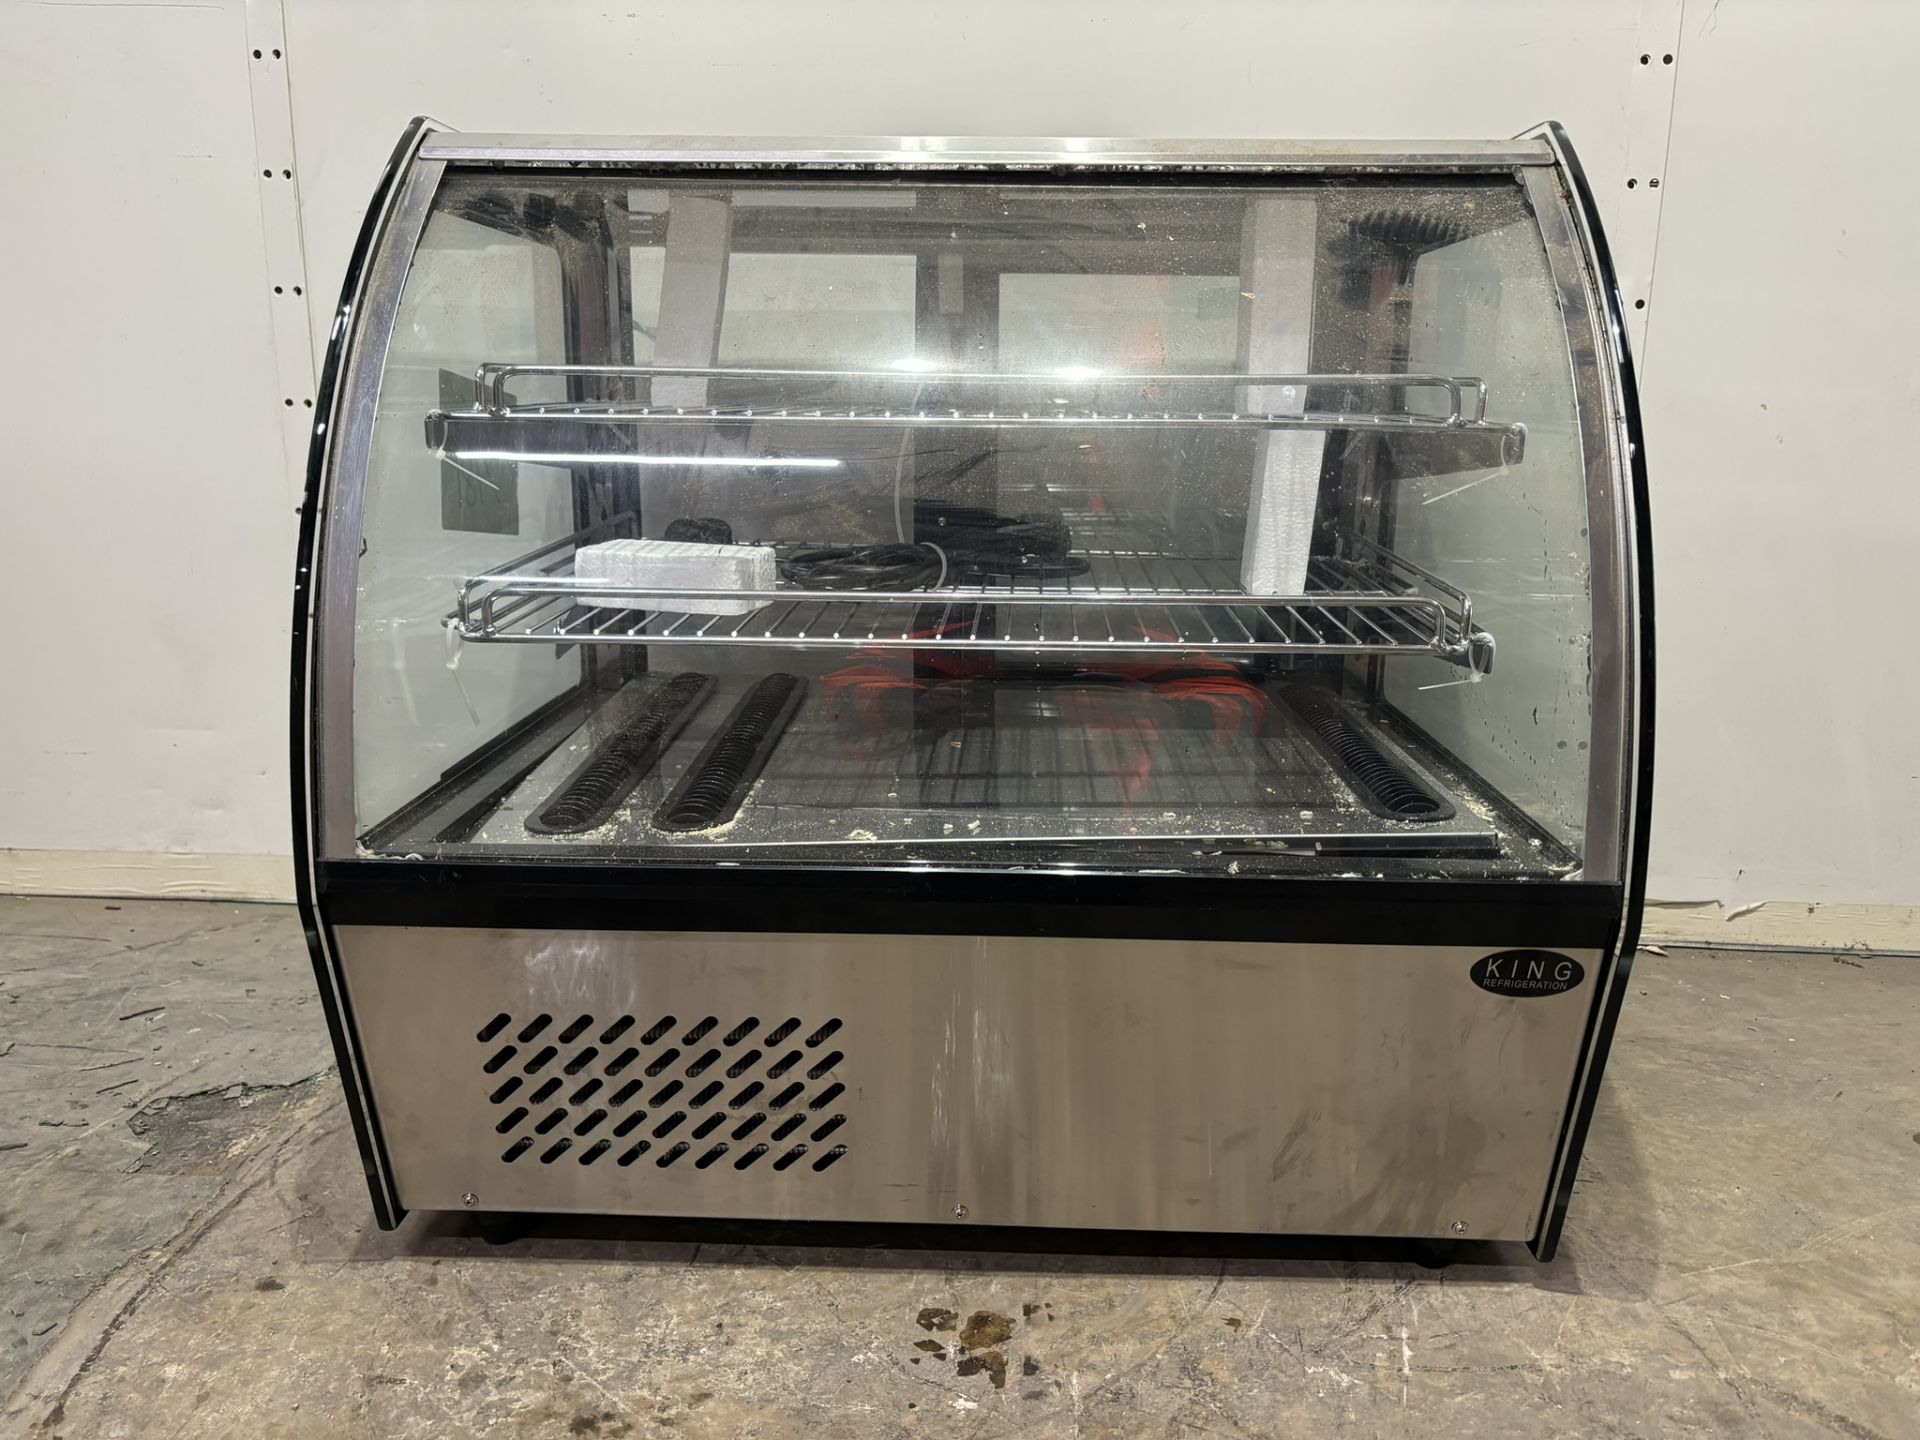 King KC120 Refrigerated Food Display Unit with LED Lighting - Image 3 of 8